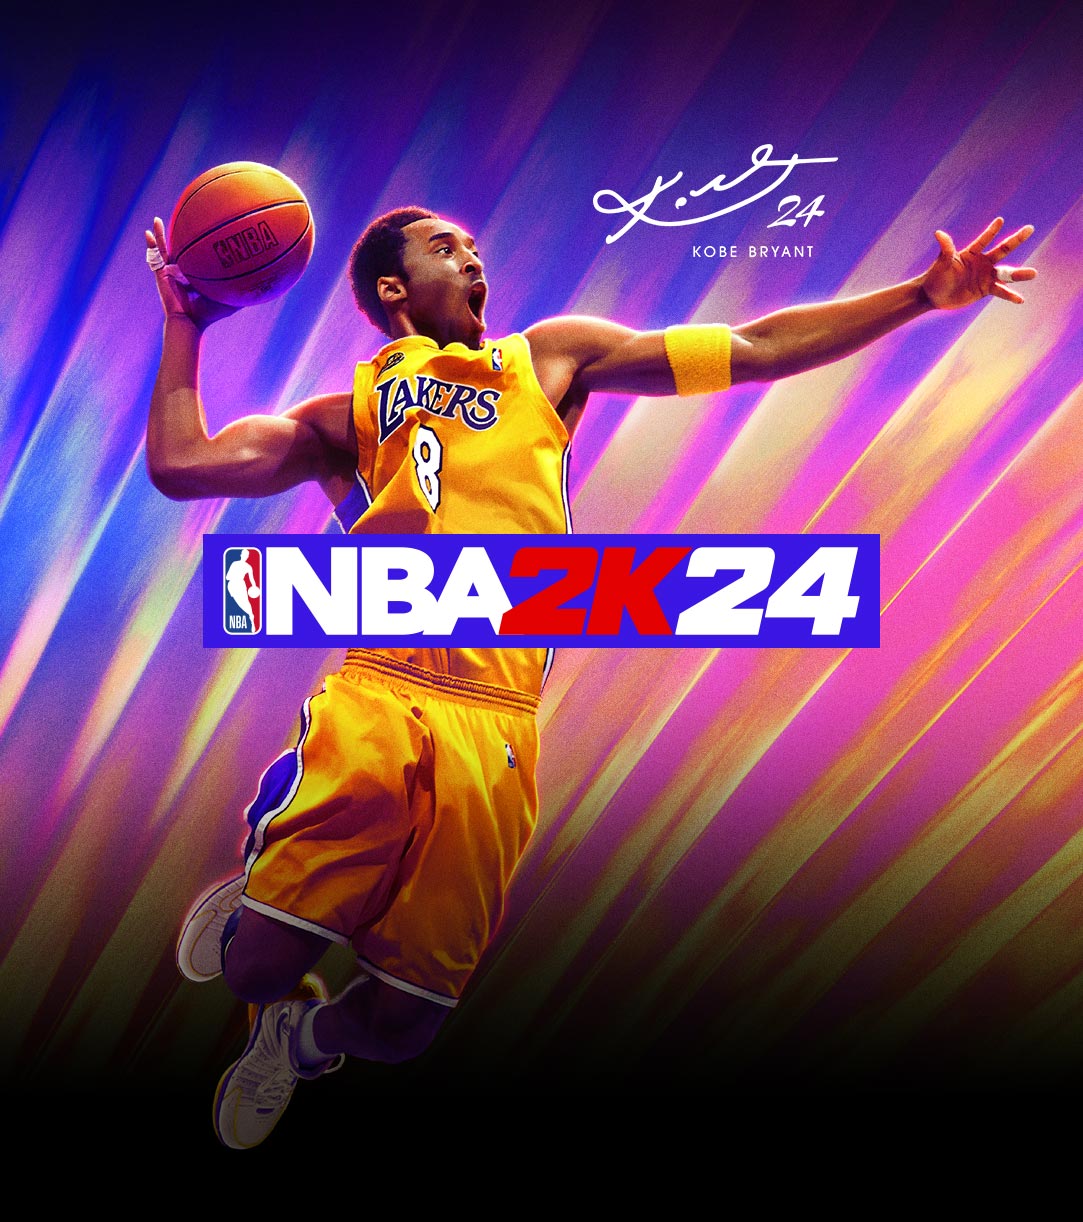 Kobe Bryant in a Lakers jersey leaping up in excitement to make a slam dunk with his signature that incorporates the number 24 featured in the lower right corner.